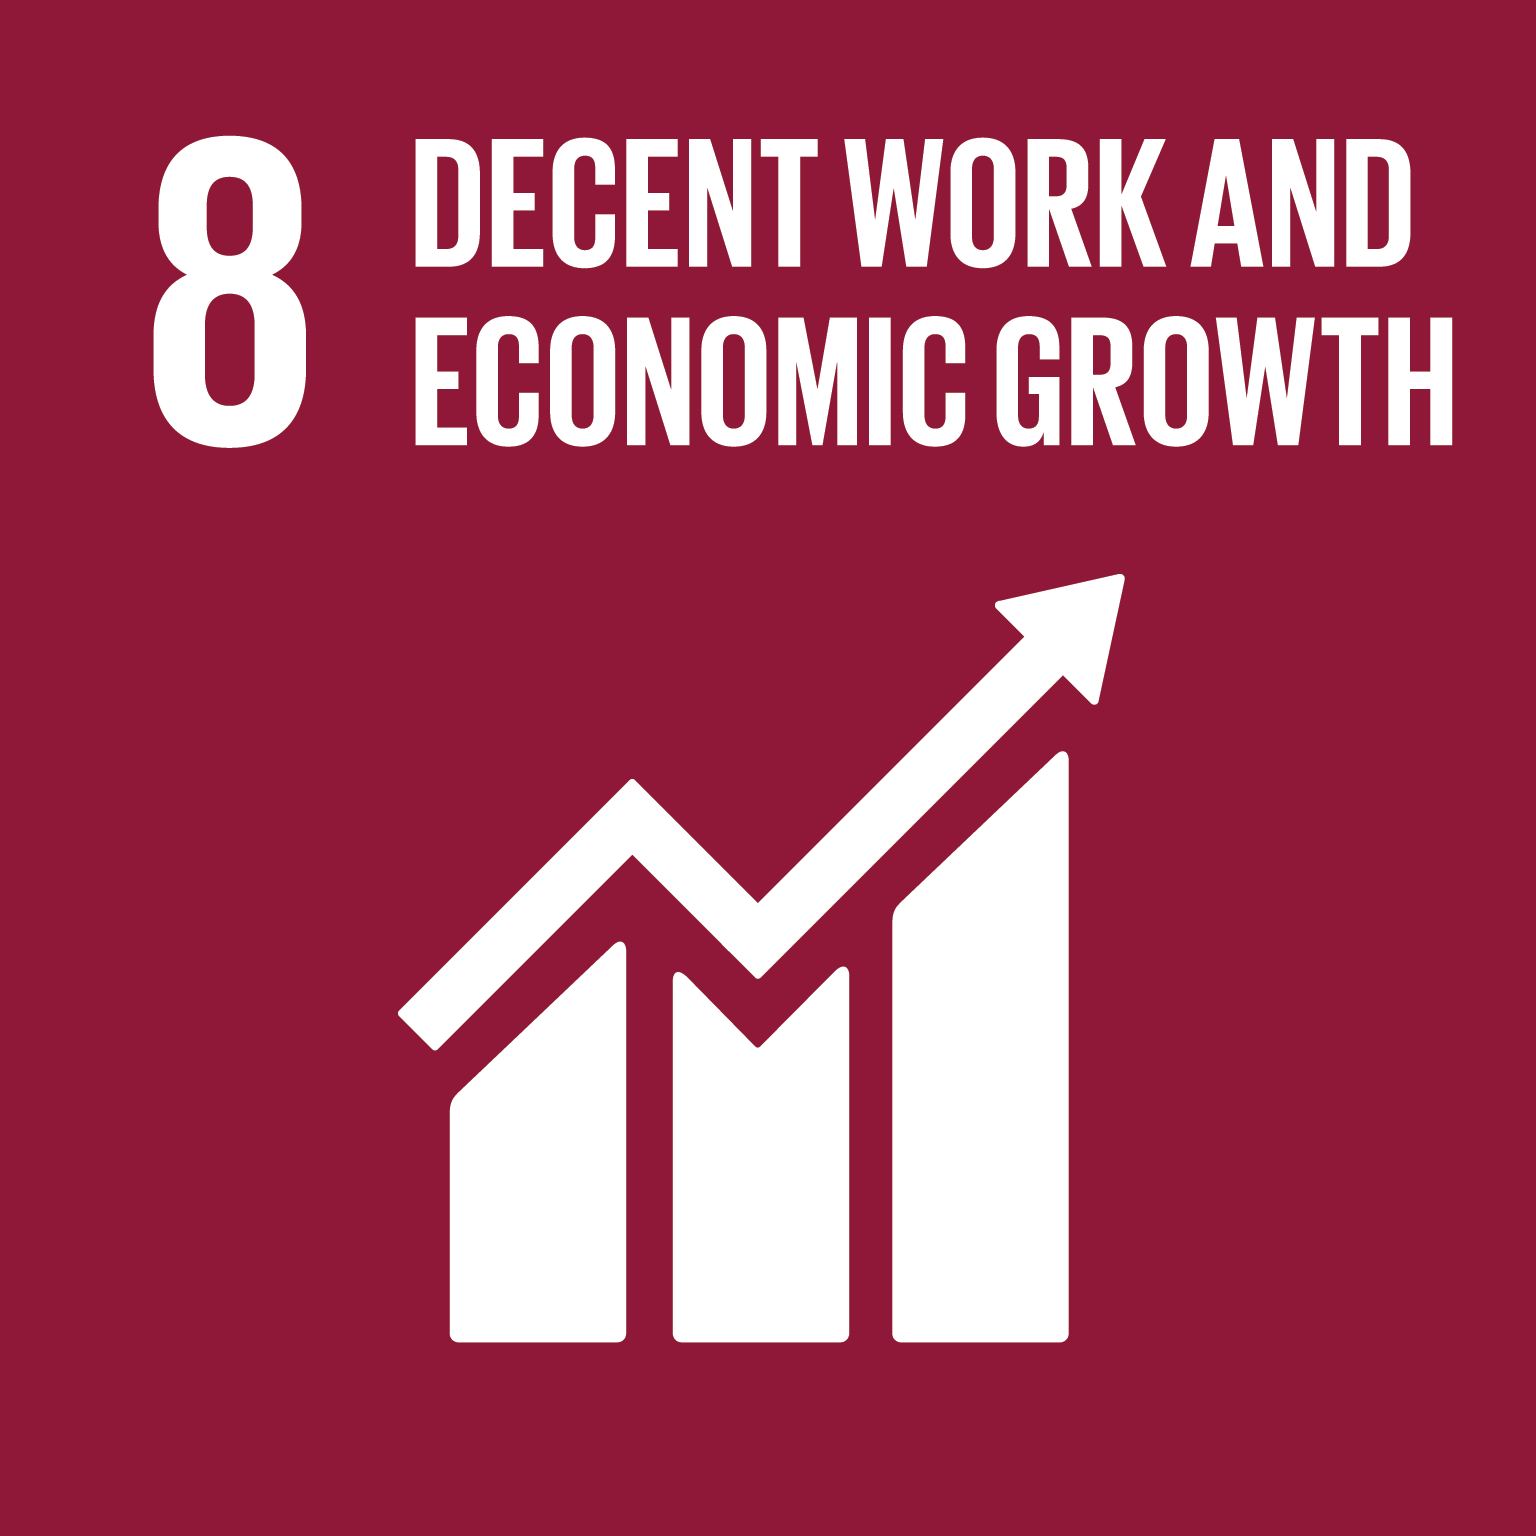 Sustainable Development Goal 8 - Promote sustained, inclusive and sustainable economic growth, full and productive employment and decent work for all